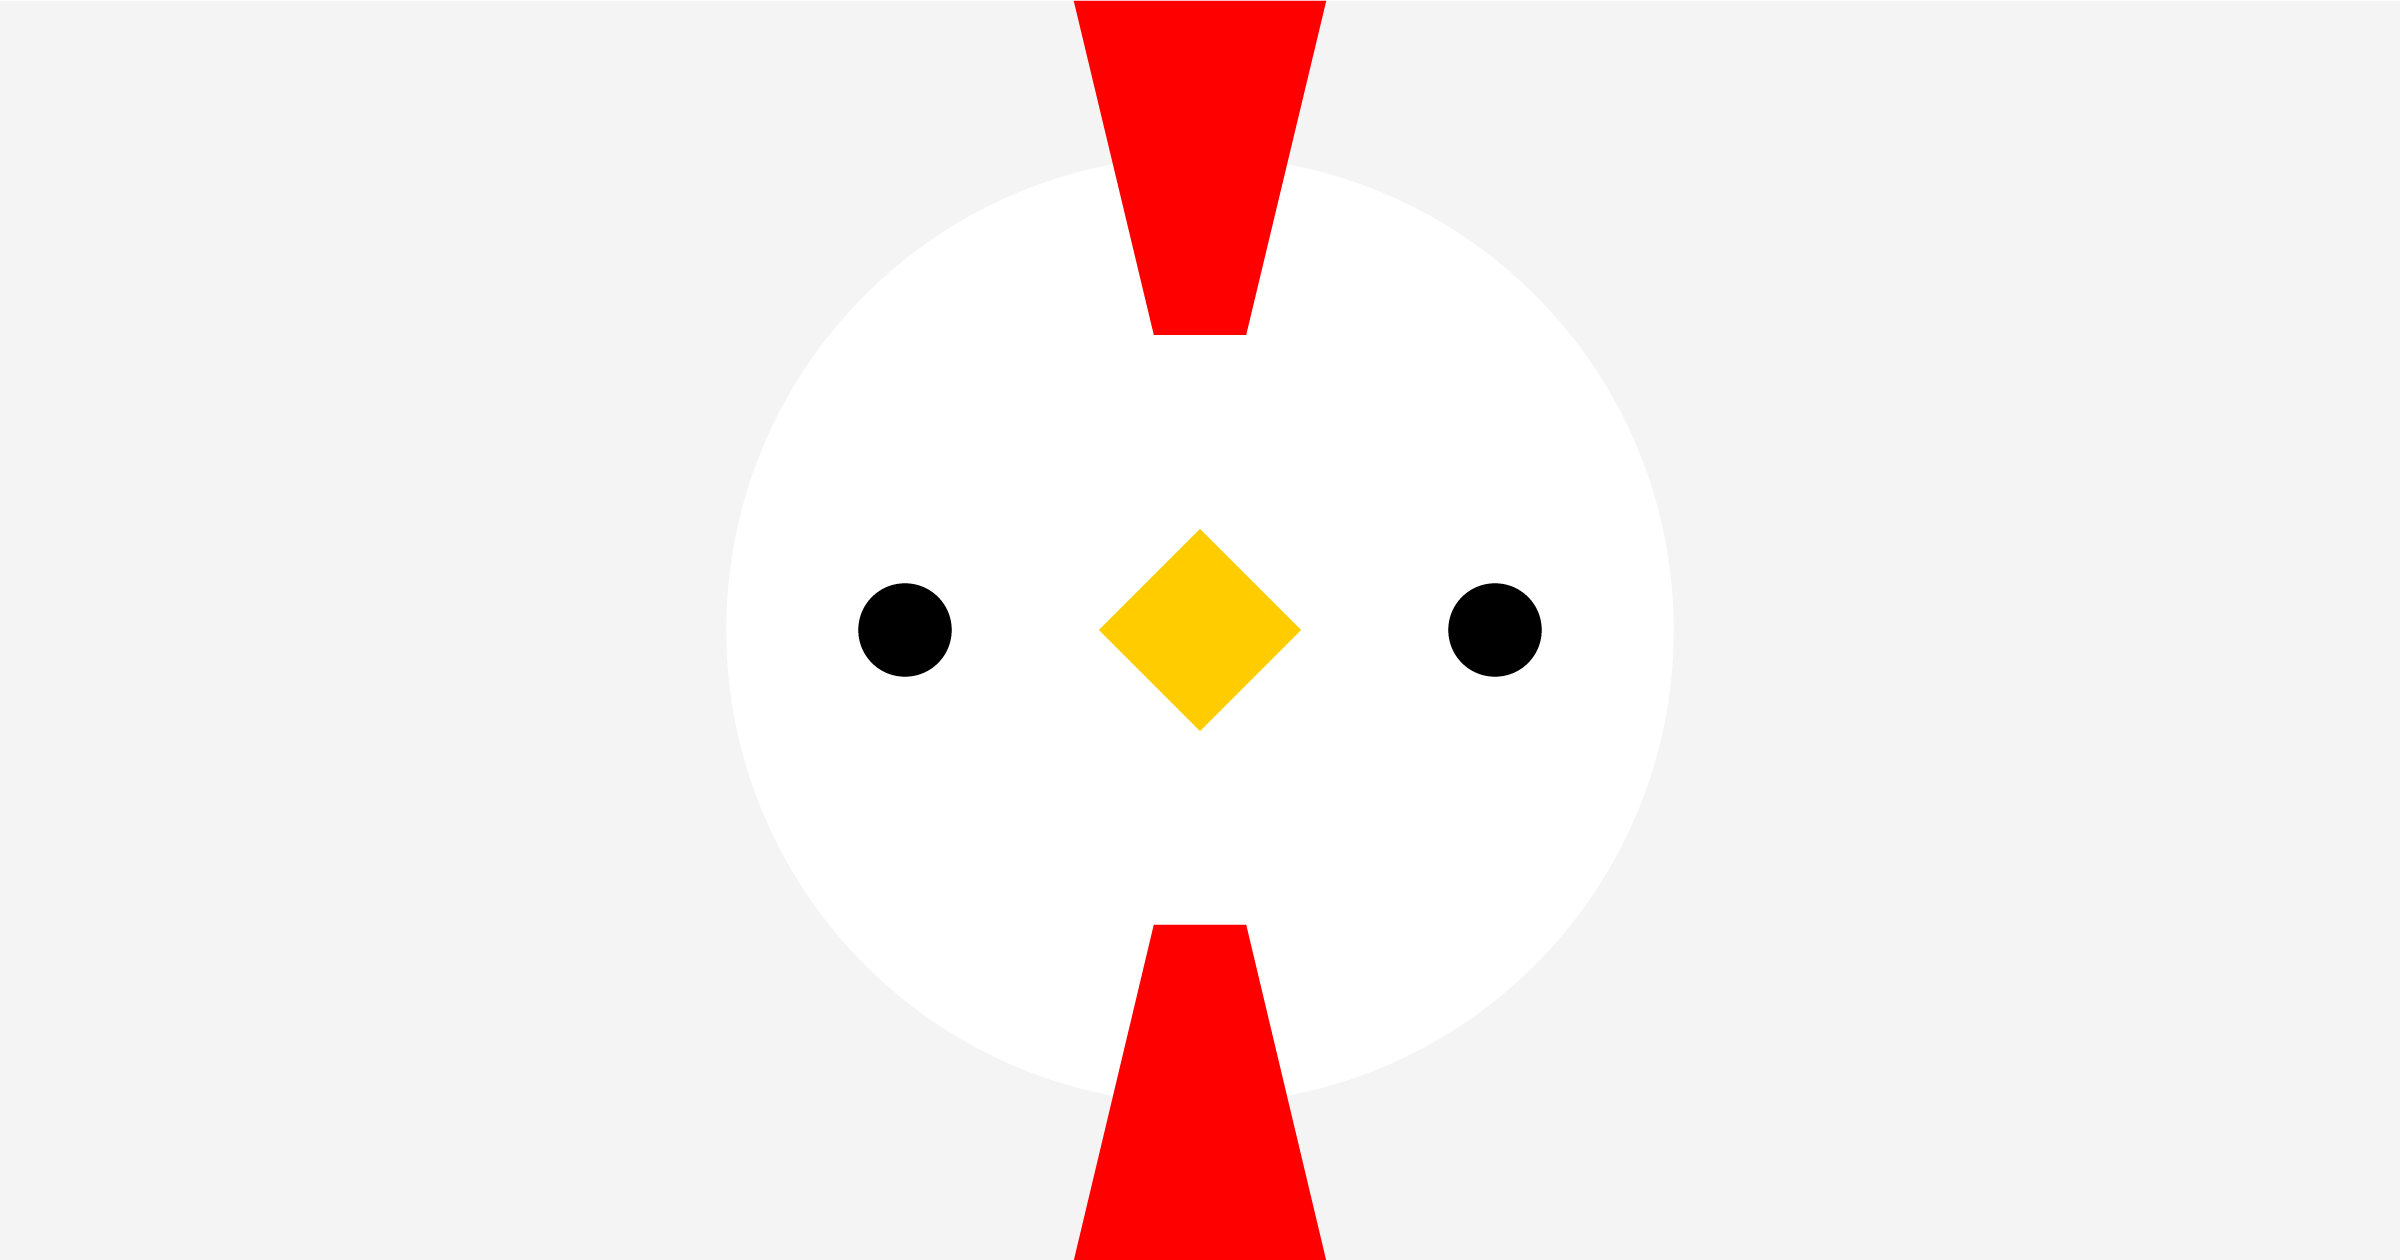 Happy New Year 2017 - Year of the Rooster